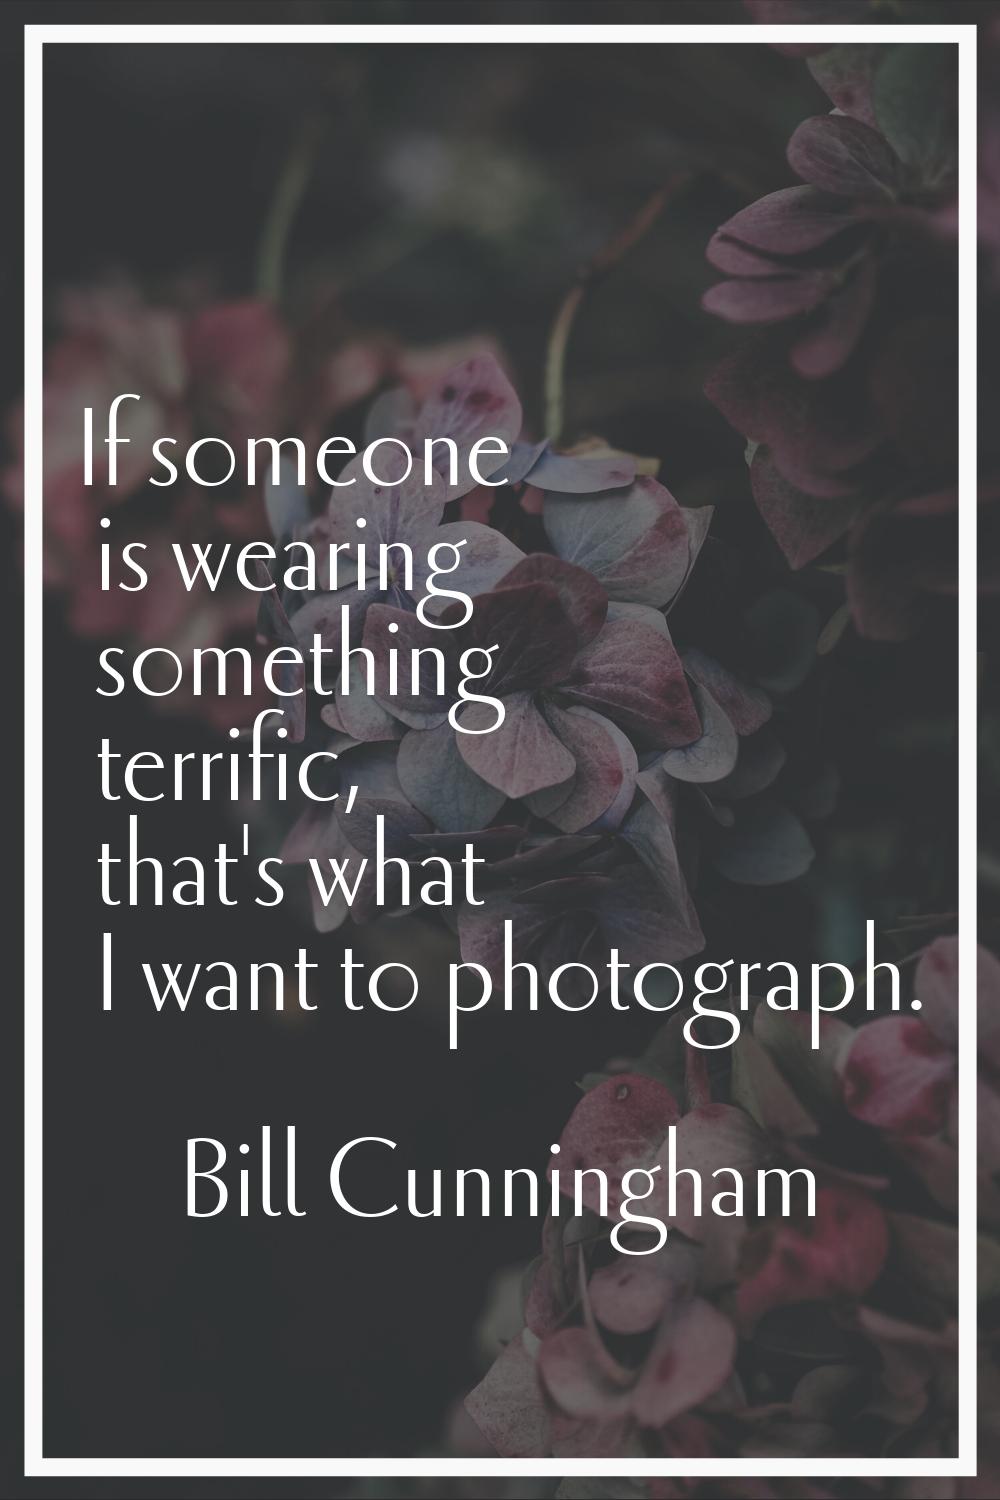 If someone is wearing something terrific, that's what I want to photograph.